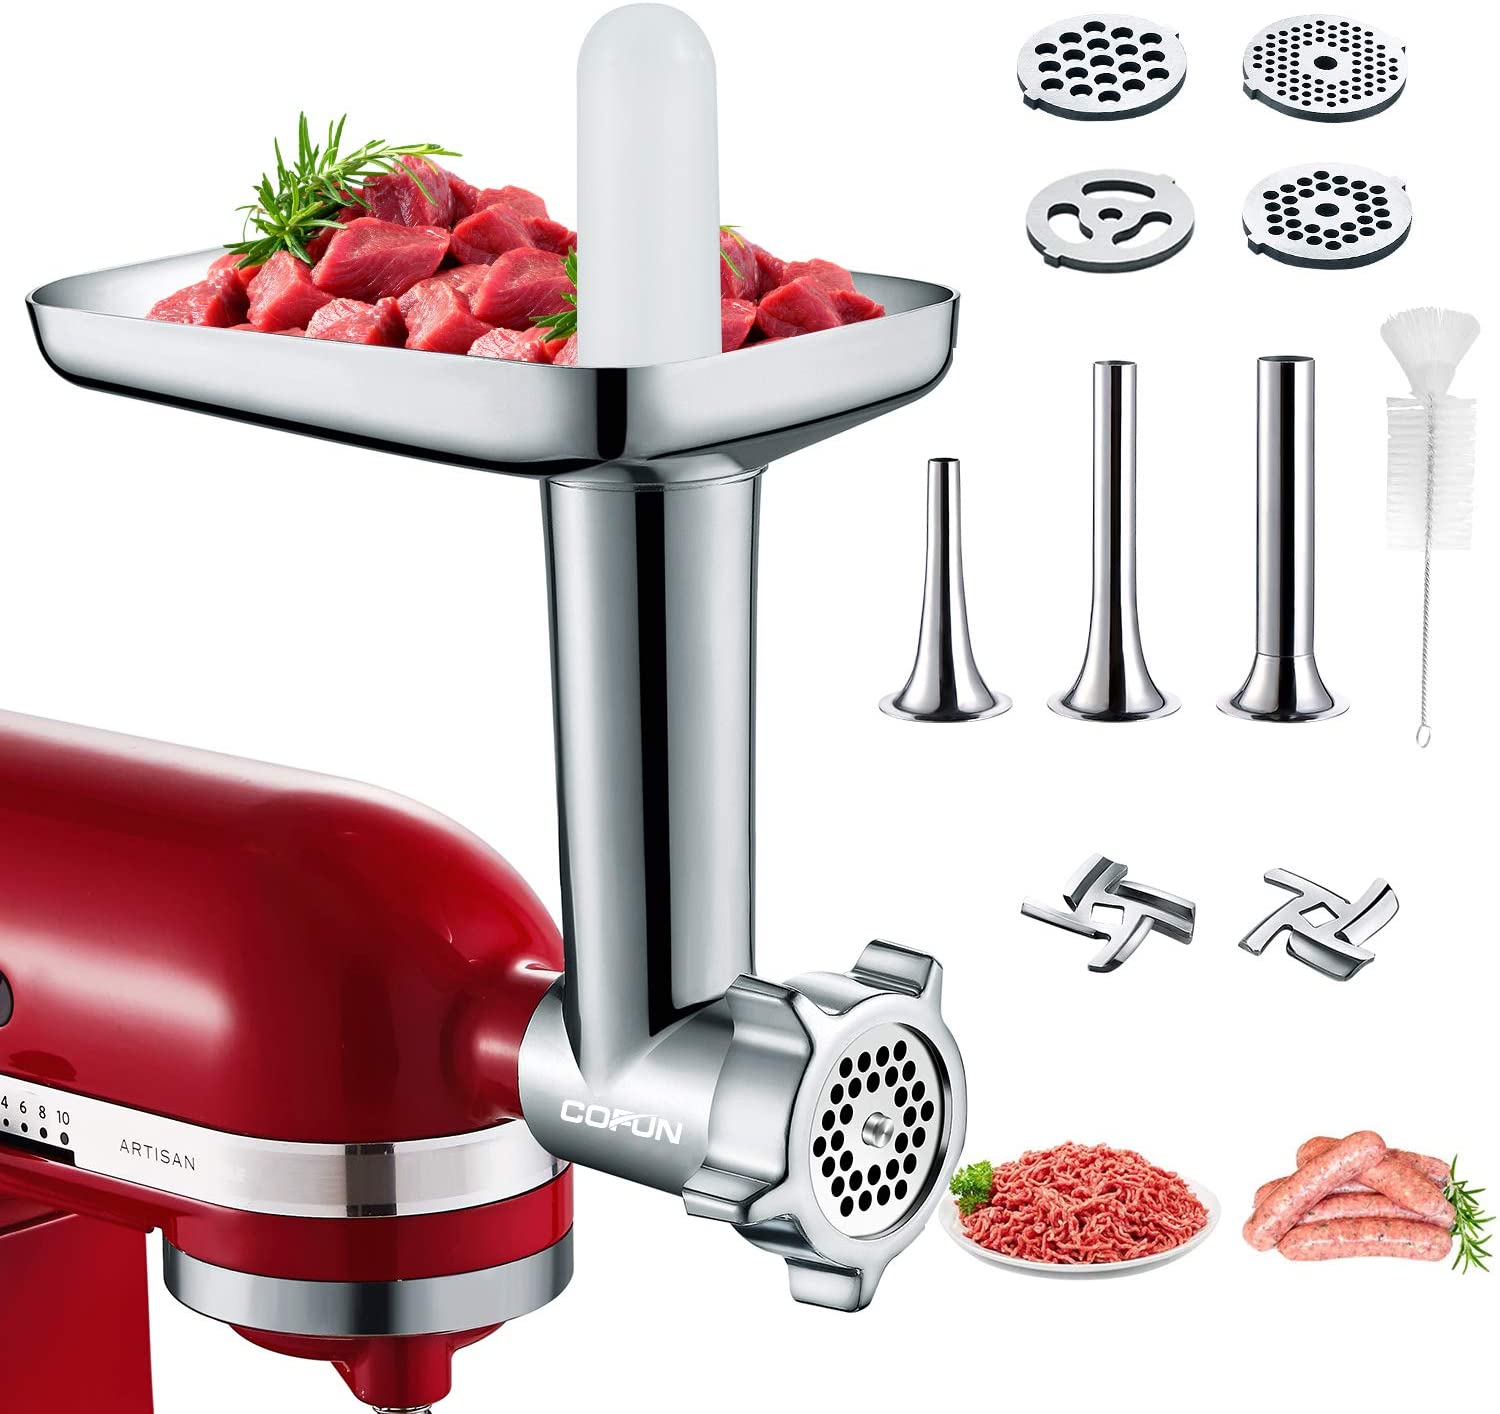 Metal Meat Grinder Attachments for KitchenAid Cofun Accessories Includes 4 Sanding Plates, 3 Sausage Filling Tubes, 2 Grinding Blades for Kitchenaid Mixer